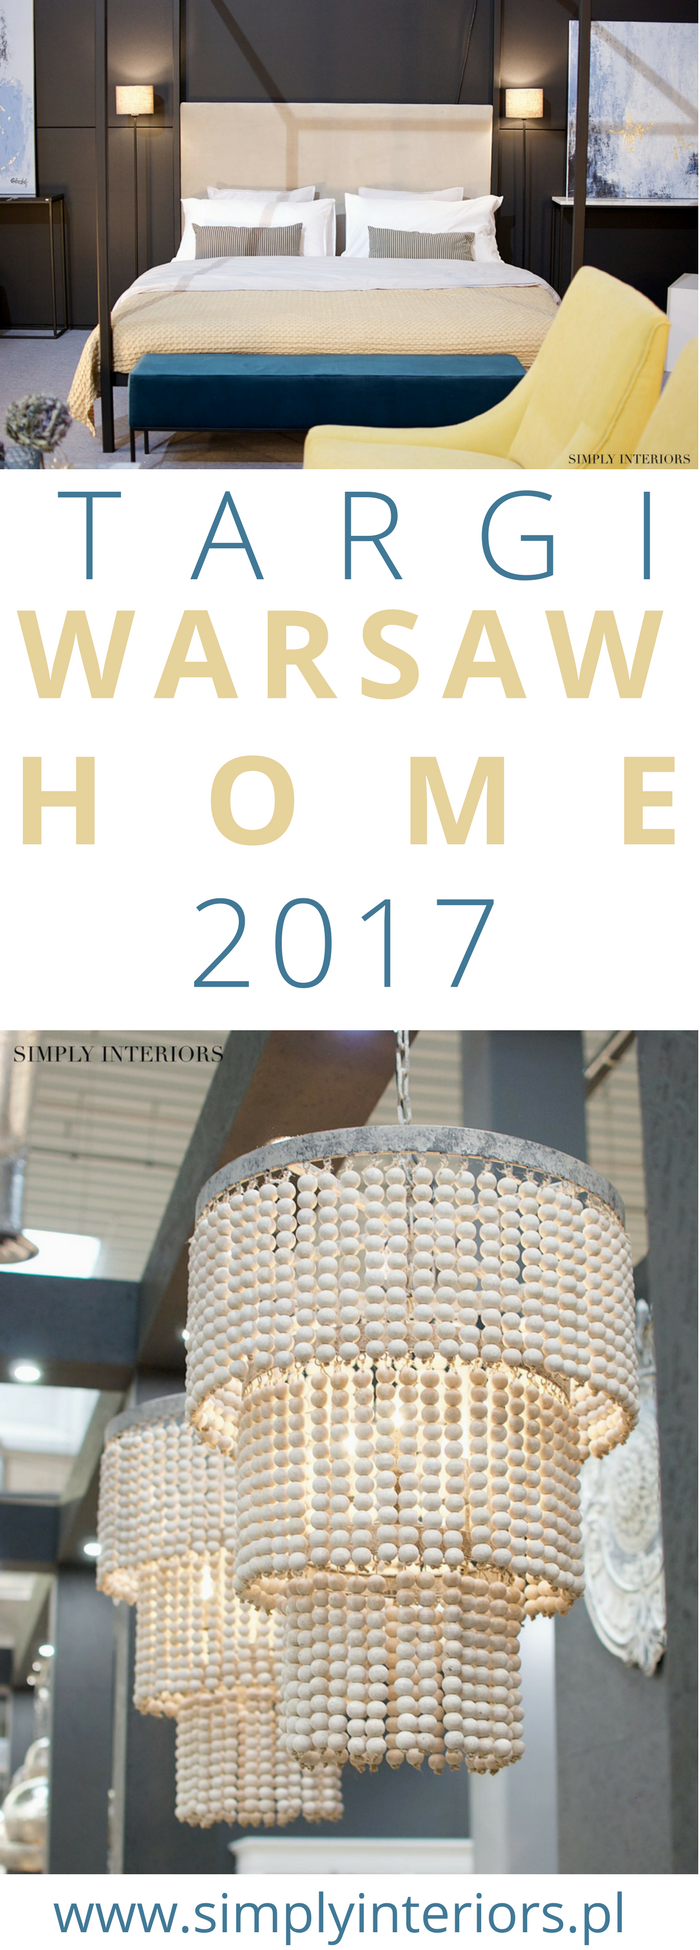 warsaw home 2017